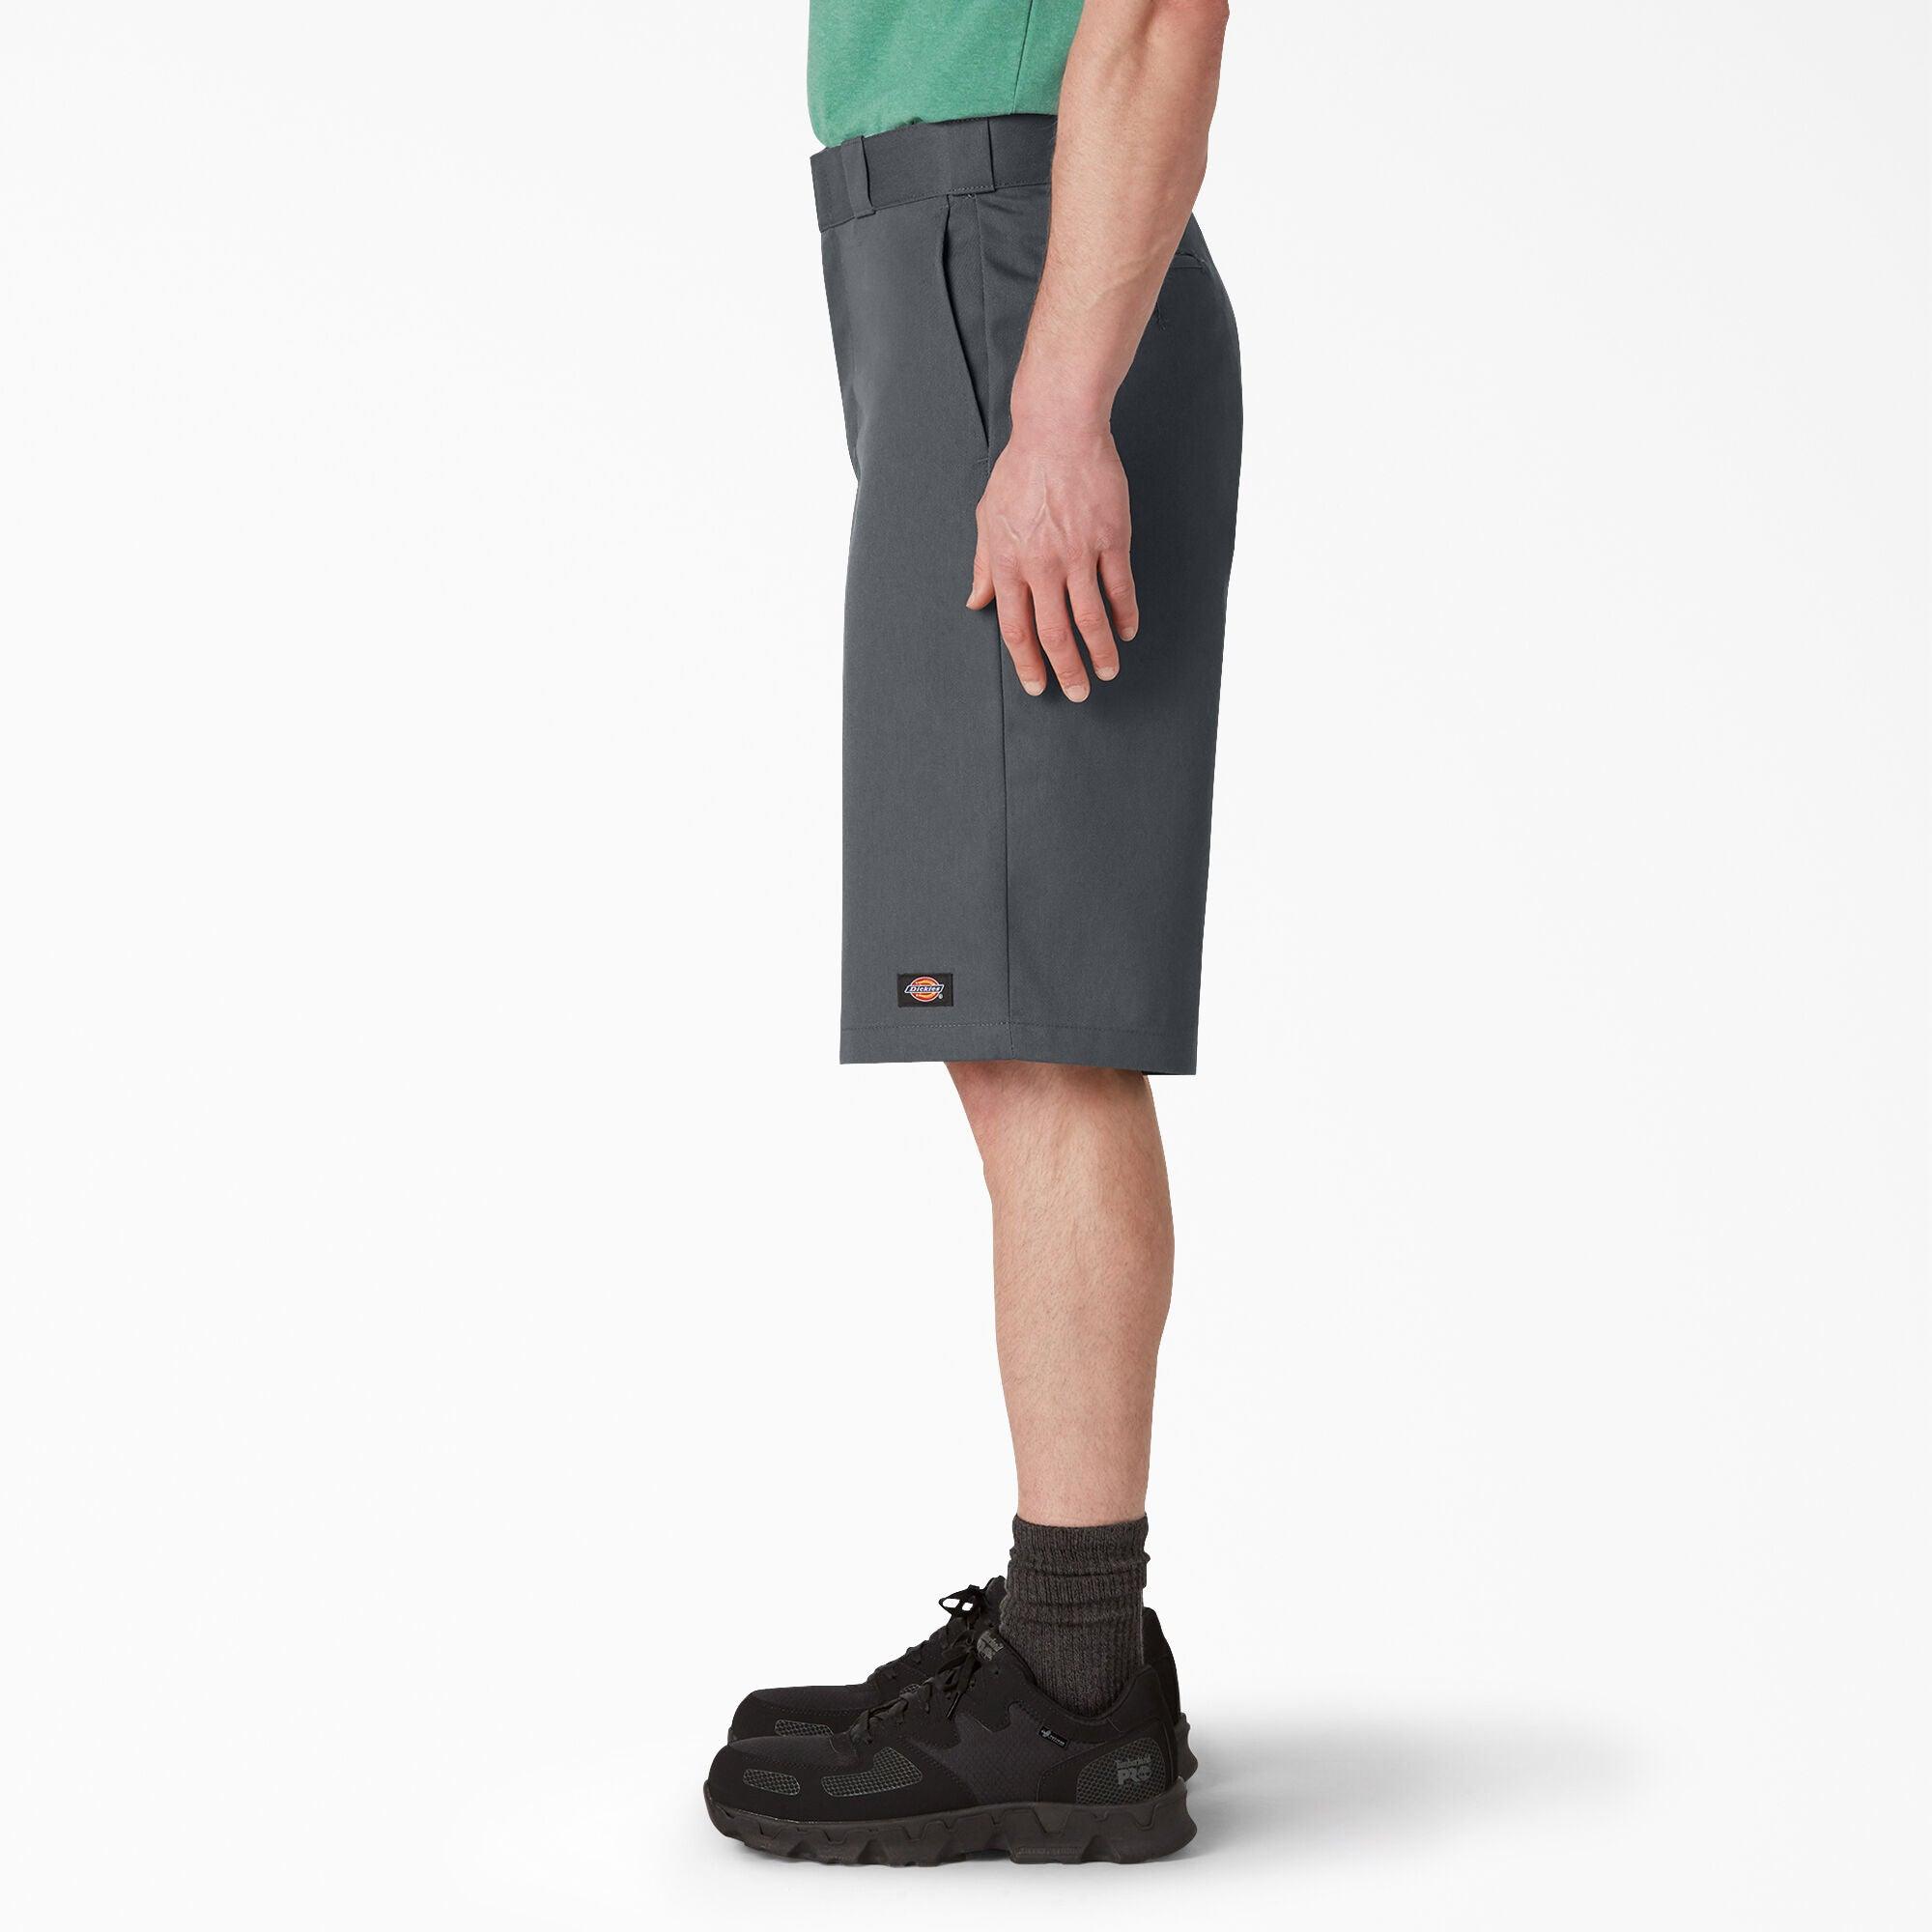 13 Loose Fit Multi-Use Pocket Work Shorts - Charcoal